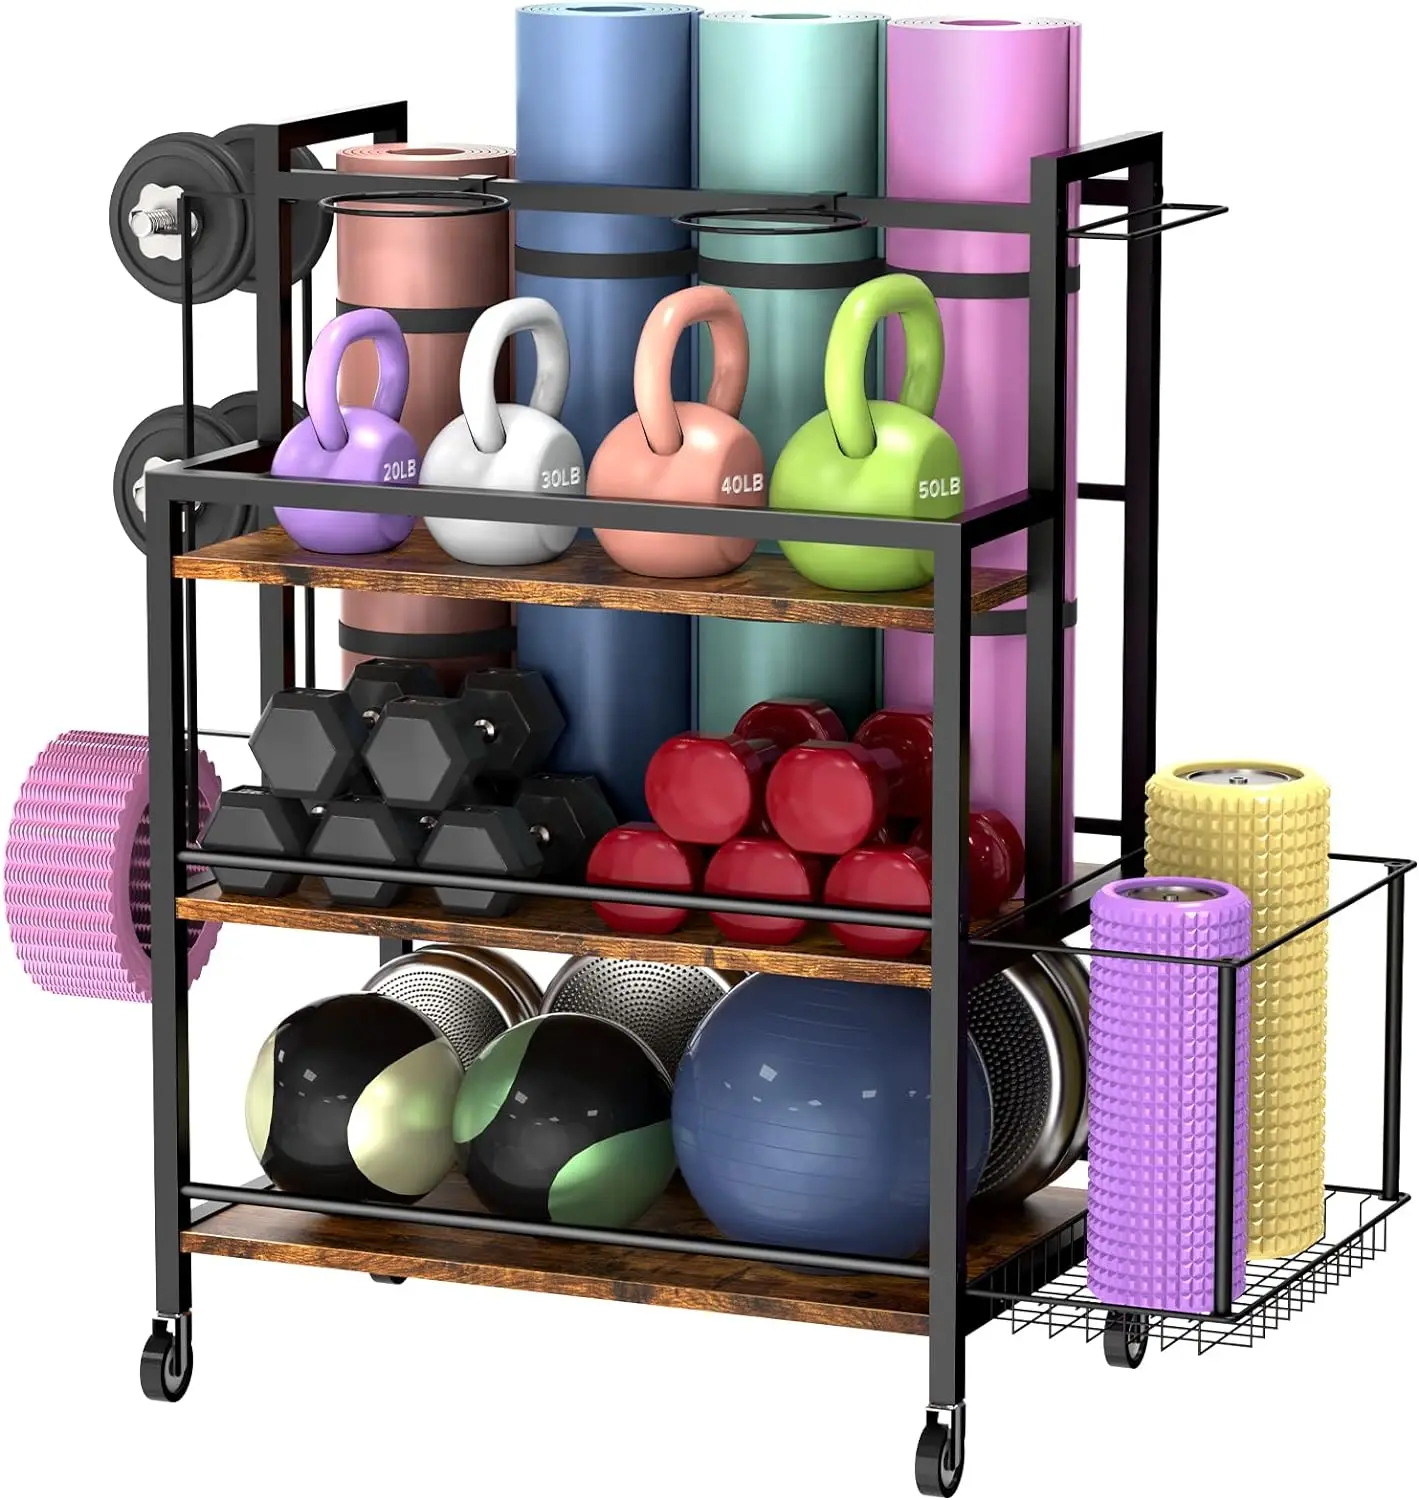 

Metal Heavy Duty Home Gym Storage for Yoga Mat - Weight Rack for Dumbbells Kettlebells, Foam Roller, Resistance and Strength Tr